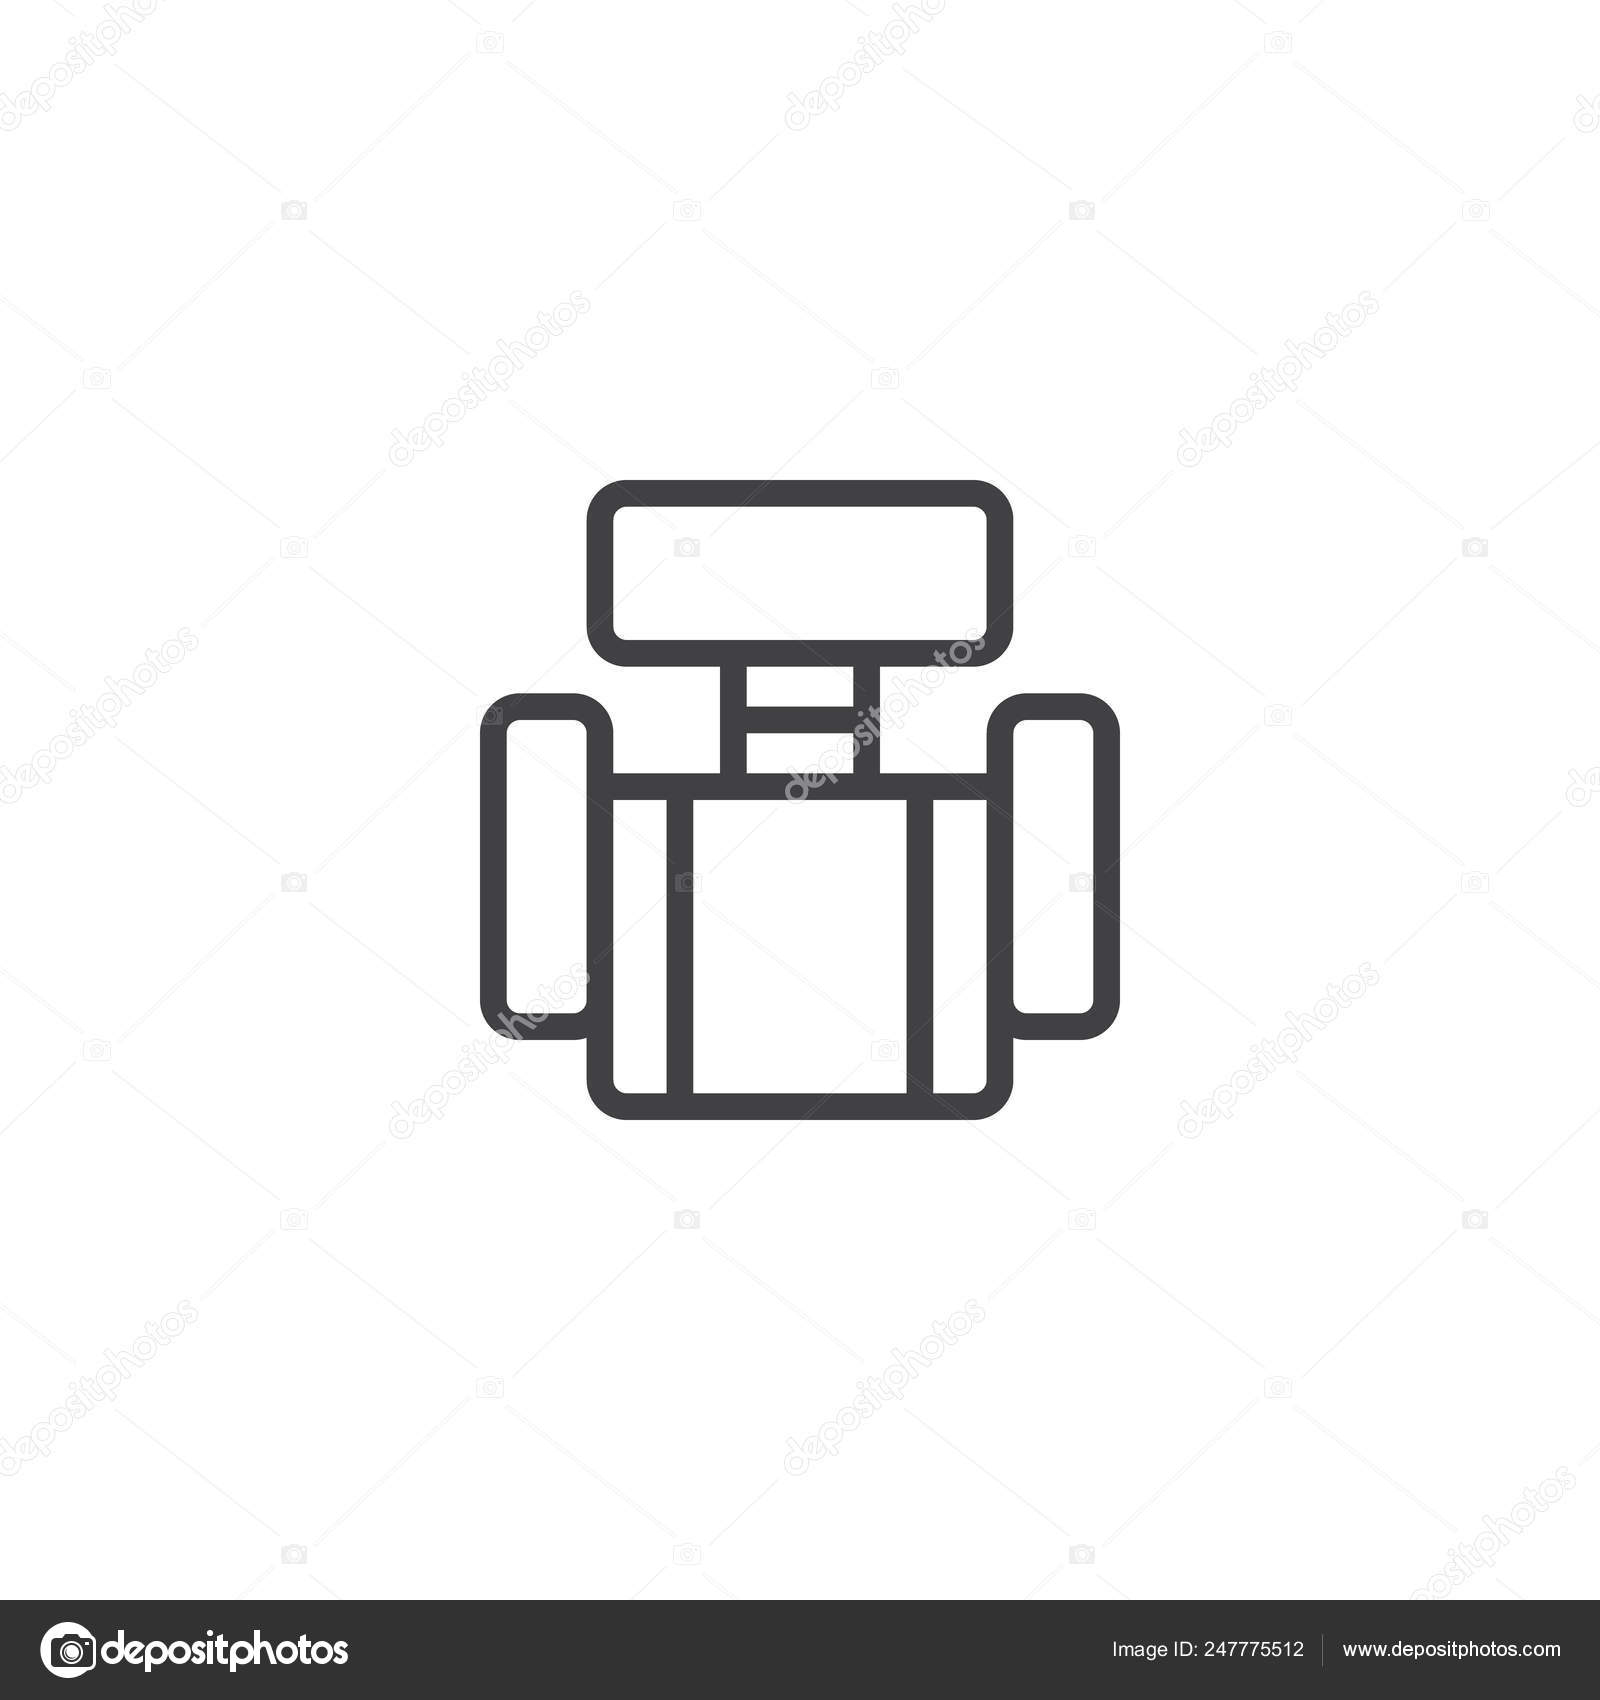 Featured image of post Office Chair Top View Icon / Office chair vector icon, free to download in eps, svg, jpeg and png formats.